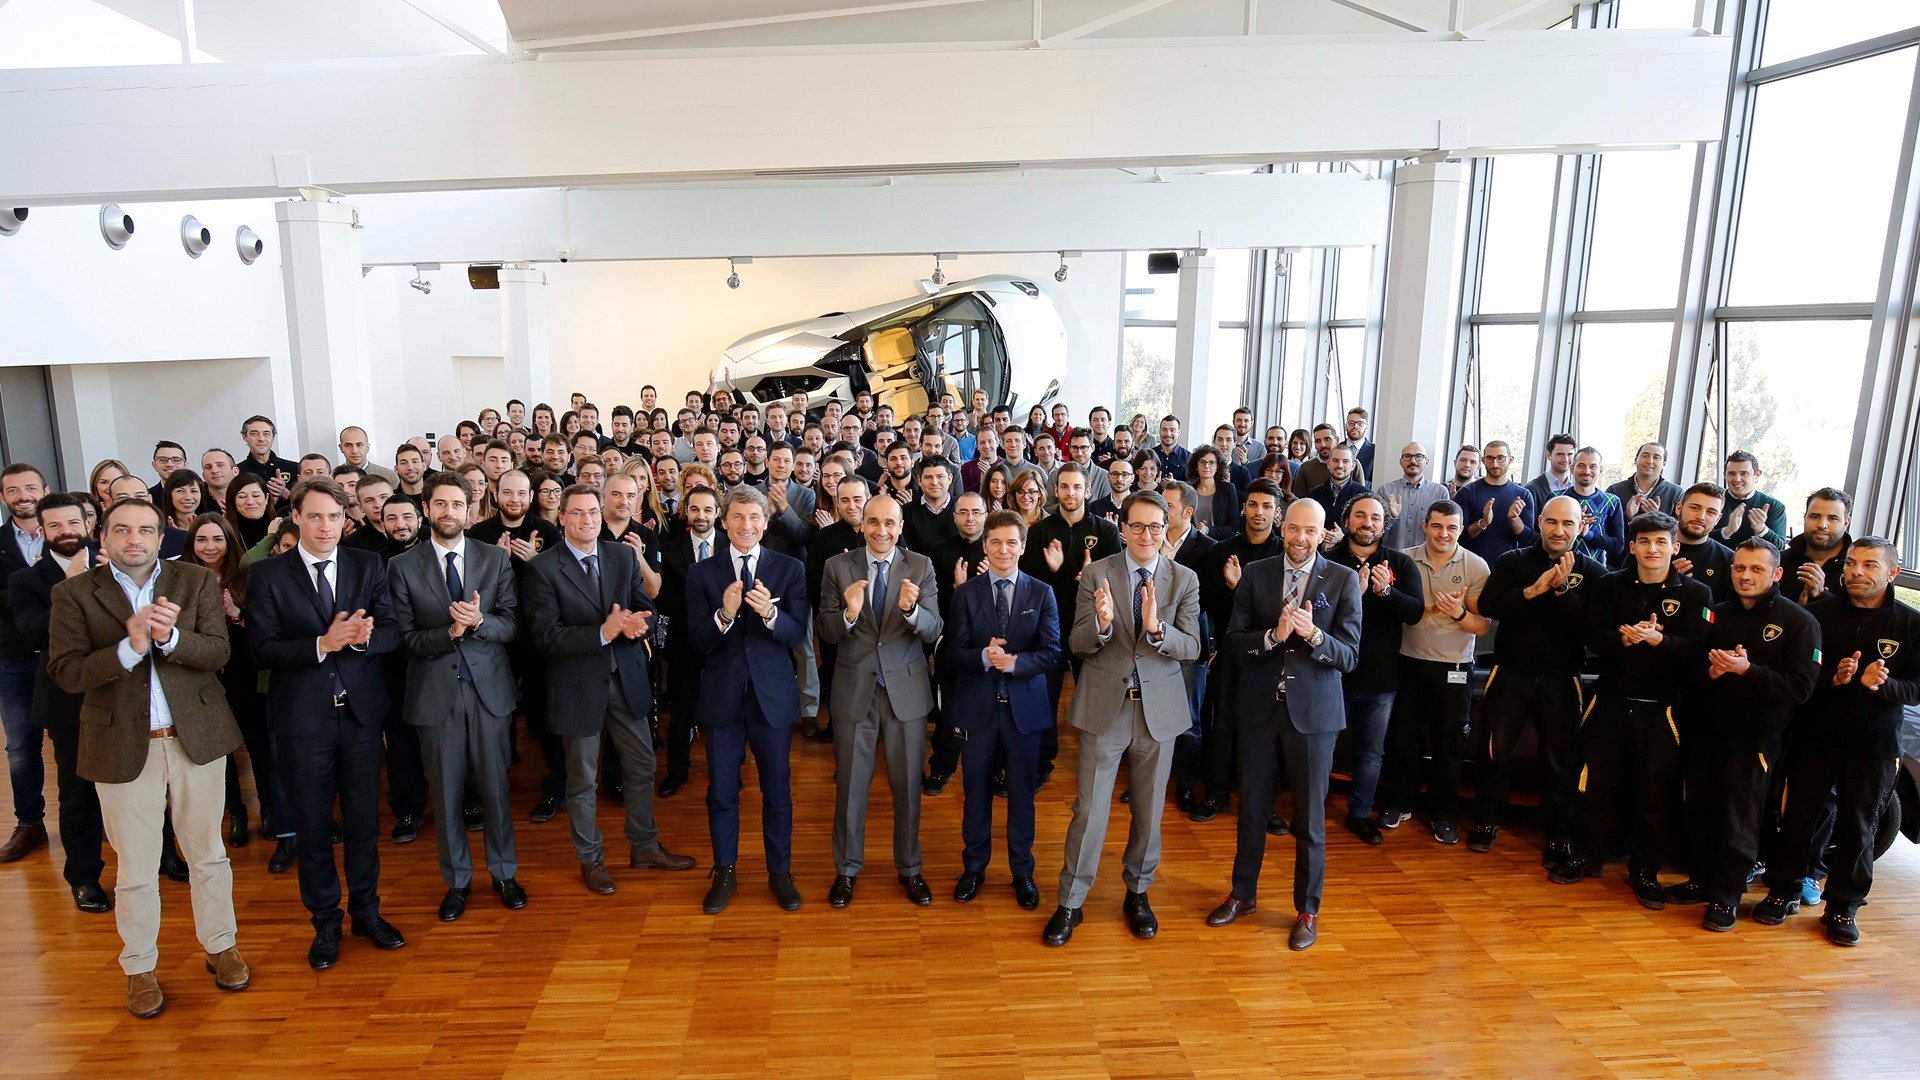 The New 150 Lamborghini Employees Together with Pres. & Ceo S. Winkelmann and the Management Board